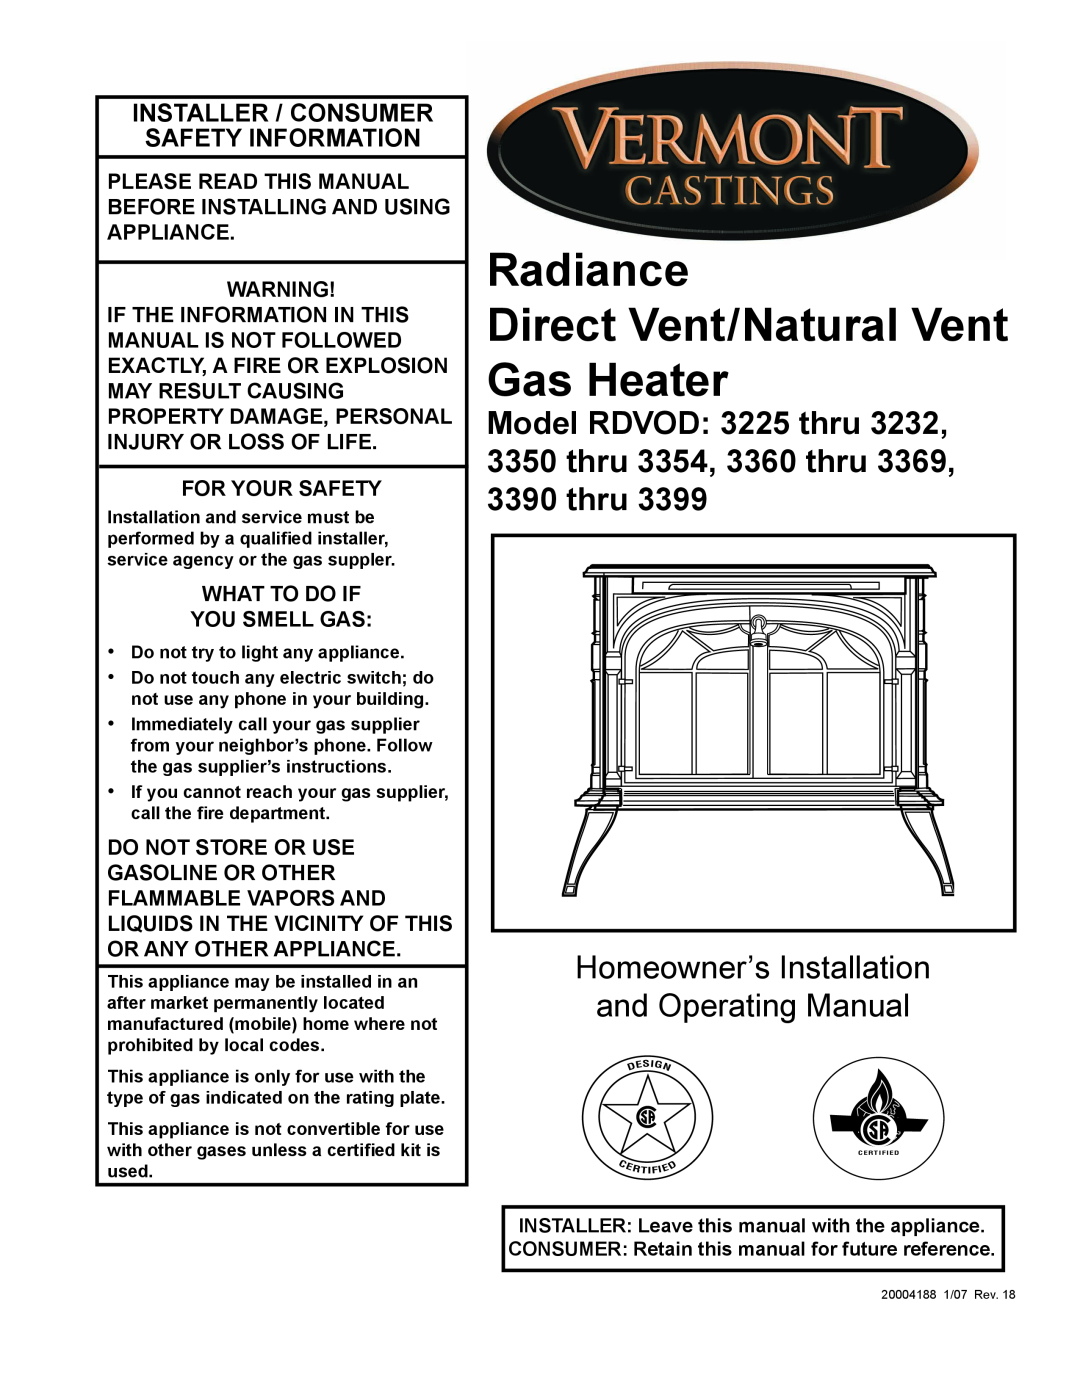 Vermont Casting 3369 manual Radiance Direct Vent/Natural Vent Gas Heater, Homeowner’s Installation and Operating Manual 